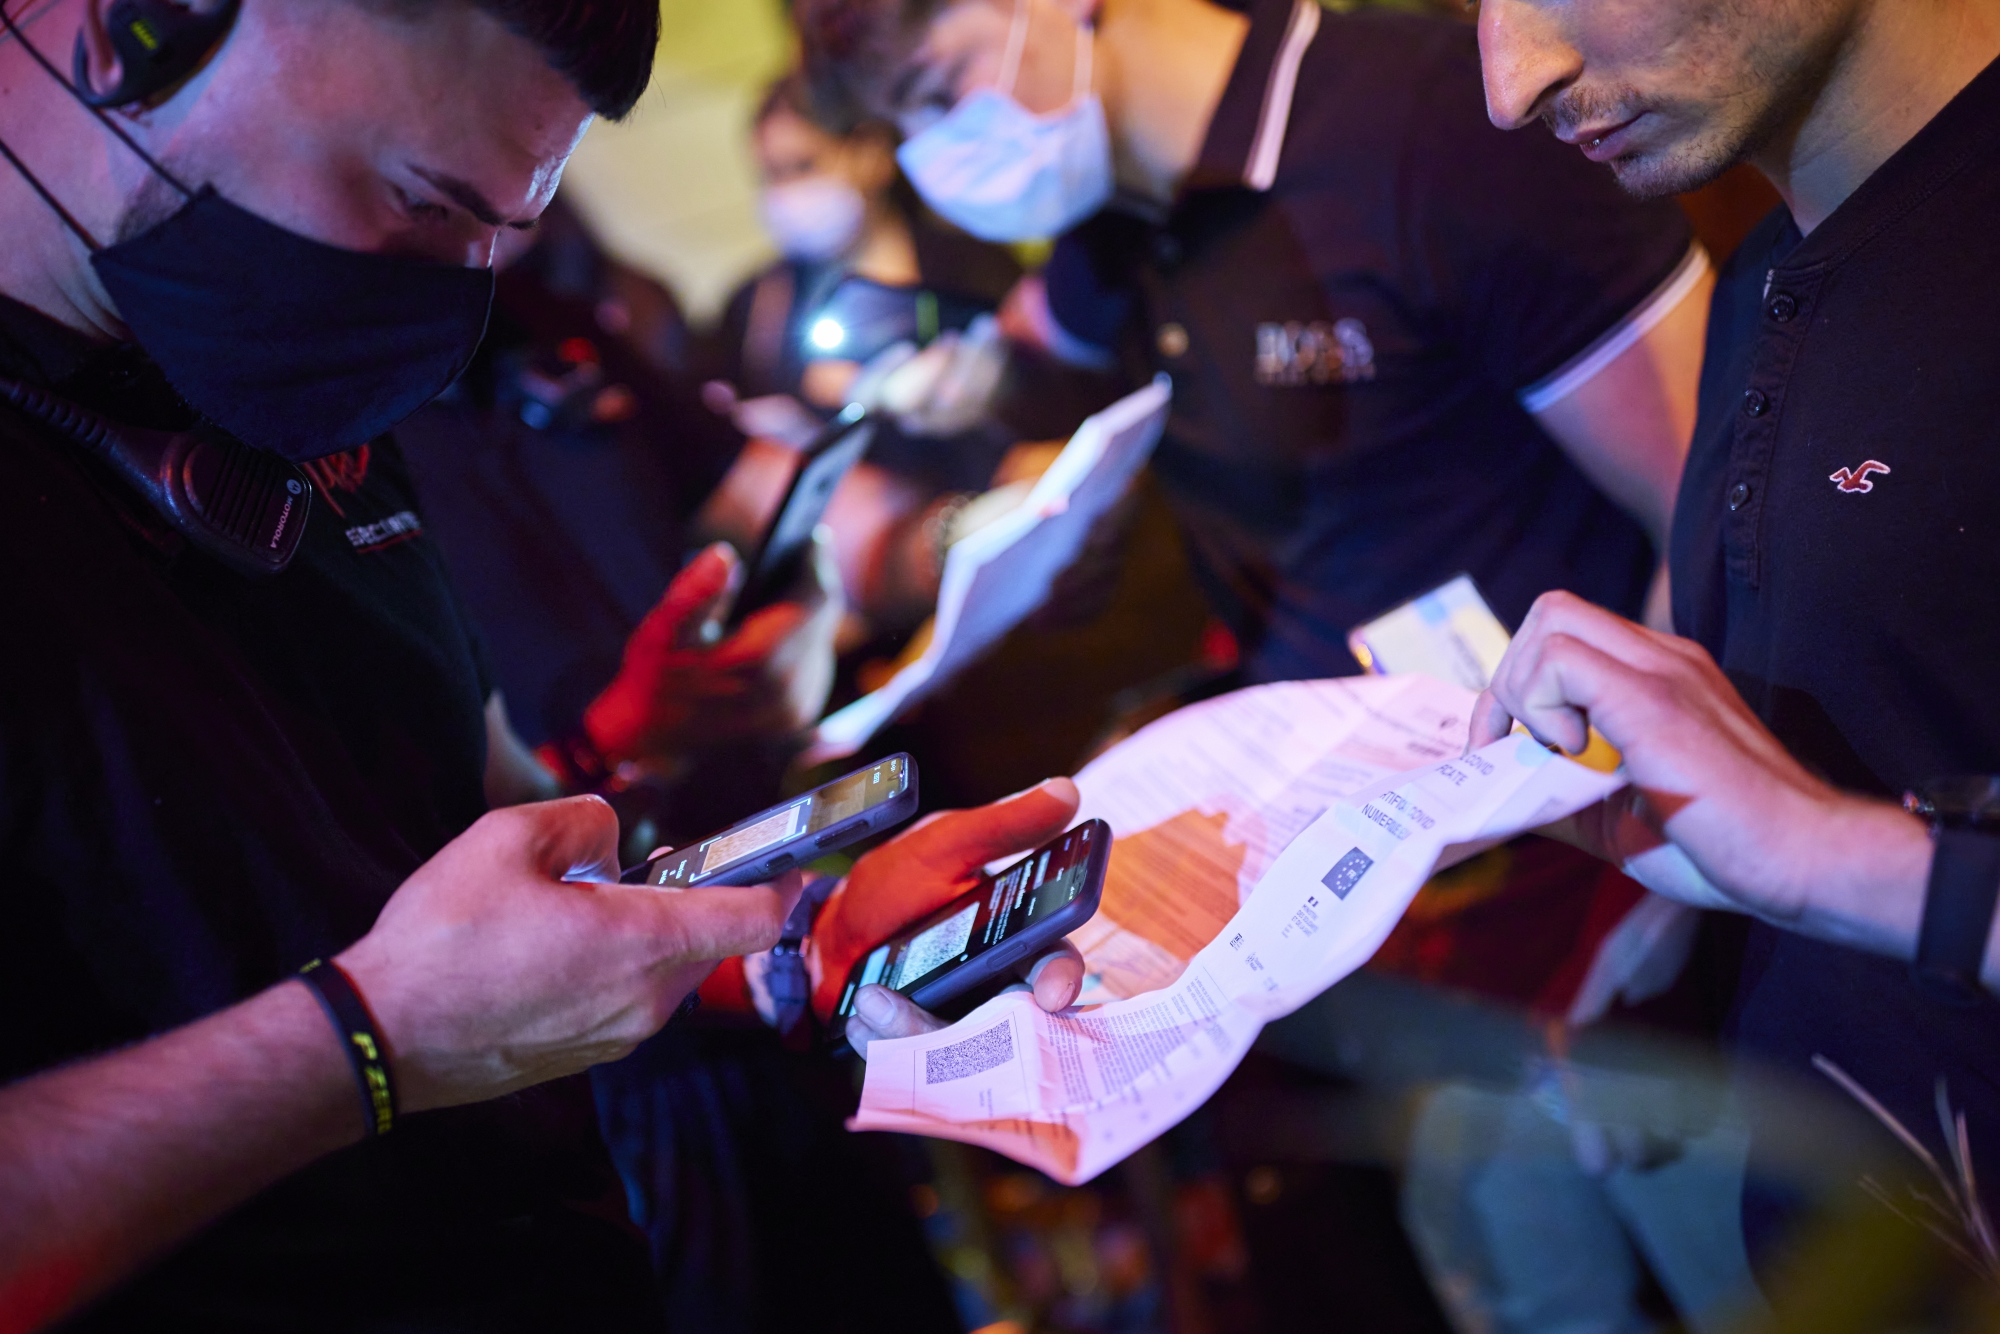 A security staff of the MAD (Moulin a Danse) night club scans the QR code of a COVID-19 certificate allowing entry in newly reopened nightclubs in Lausanne, Switzerland, late Friday, June 25, 2021. (KEYSTONE/Valentin Flauraud)